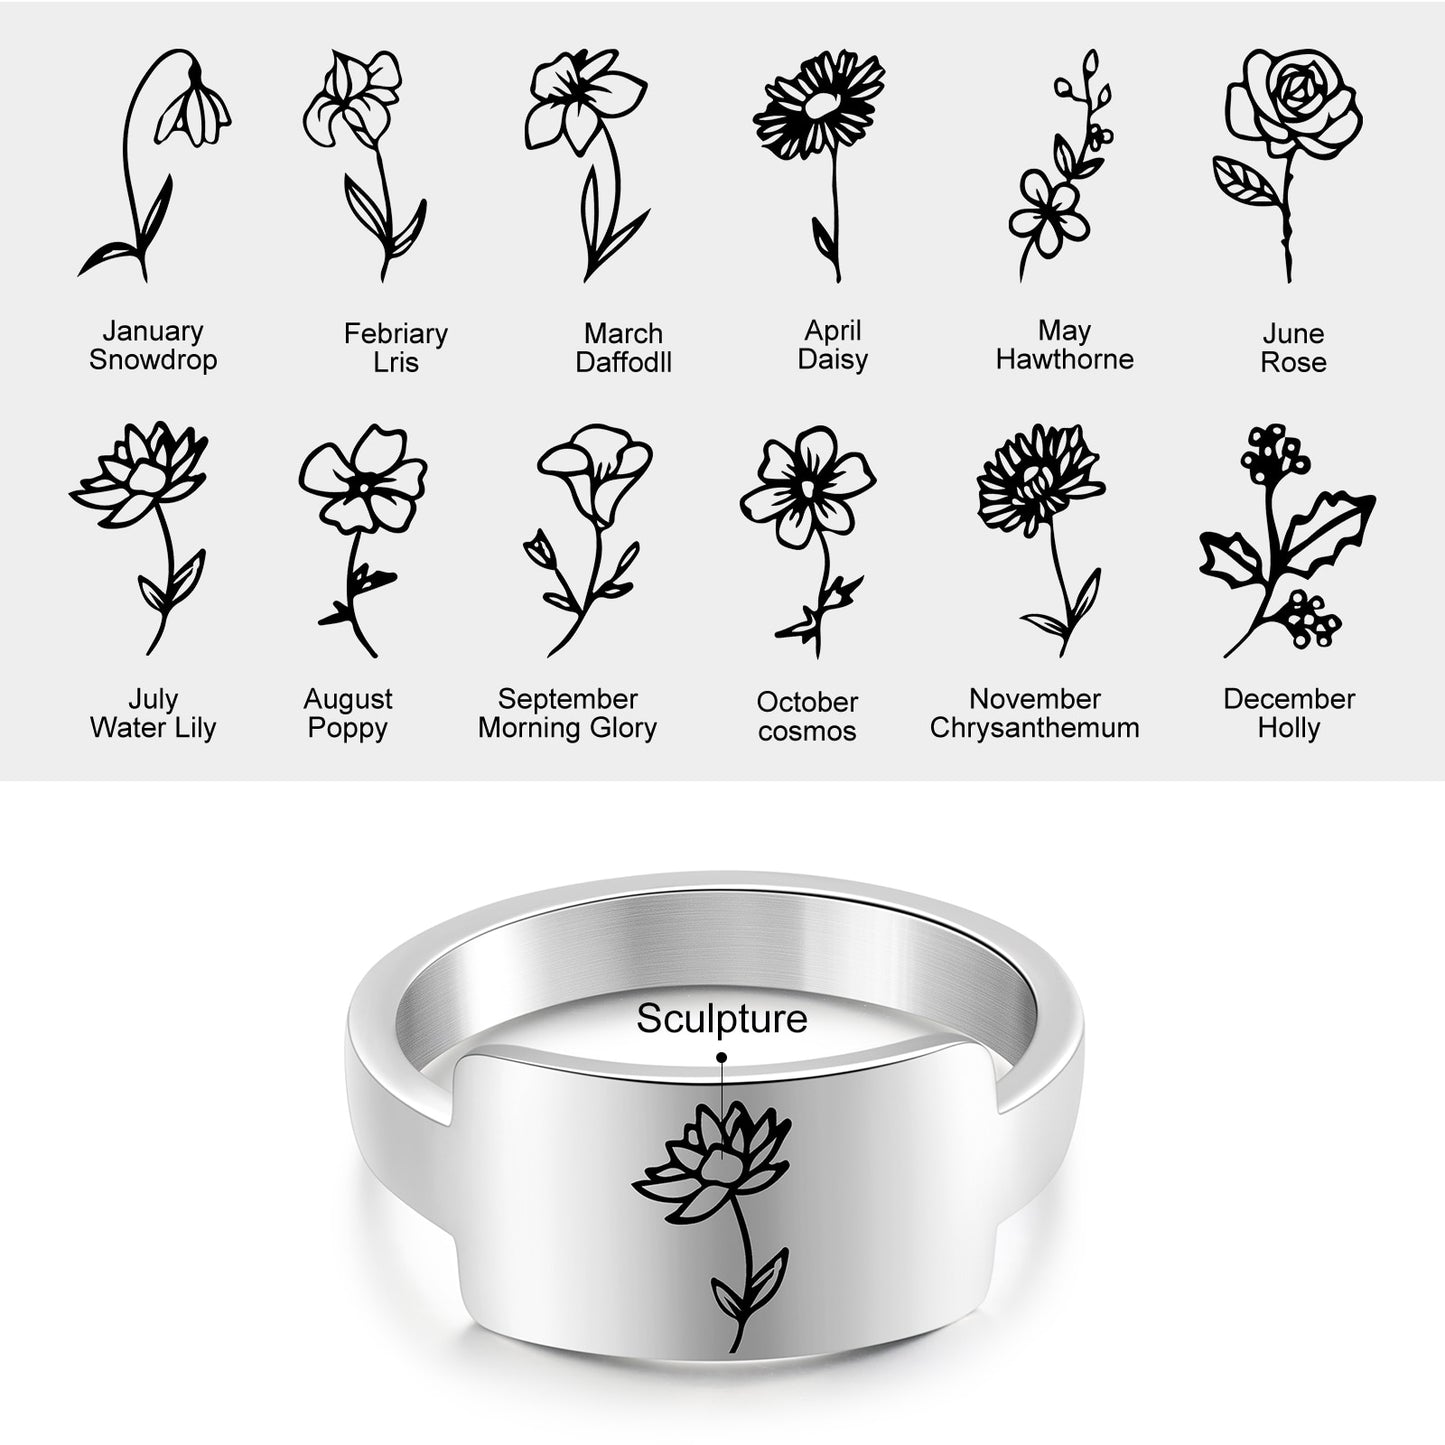 Ring with birth month flower